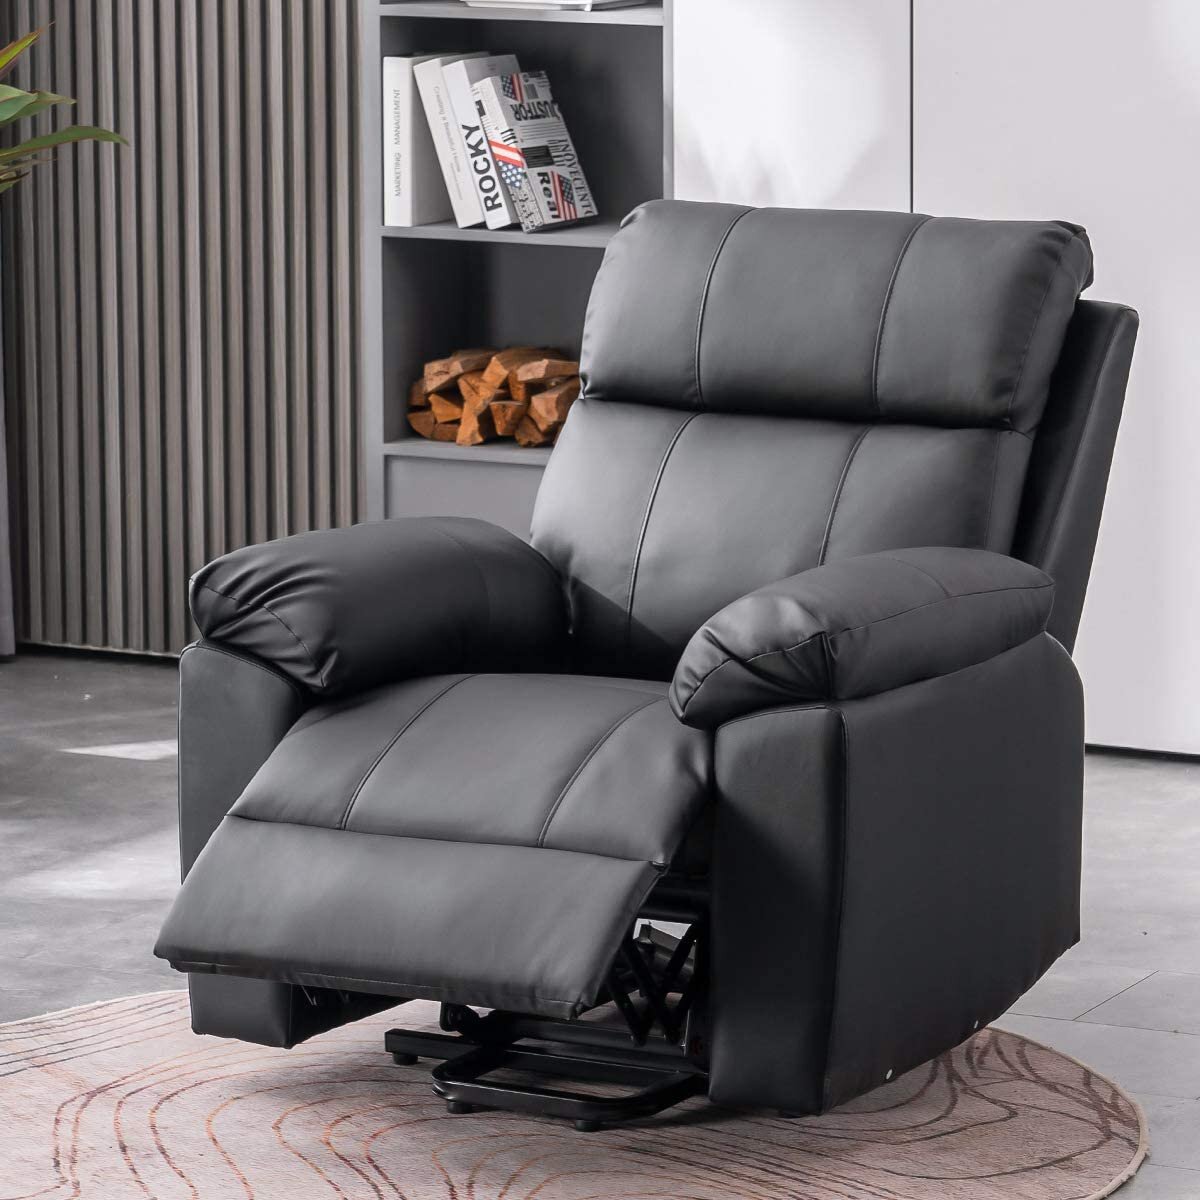 Latitude Run® Massage Recliner Chair, Recliner Sofa PU Leather For Adults,  Recliners Home Theater Seating With Lumbar Support, Reclining Sofa Chair  For Living Room (Dark Black, Leather)